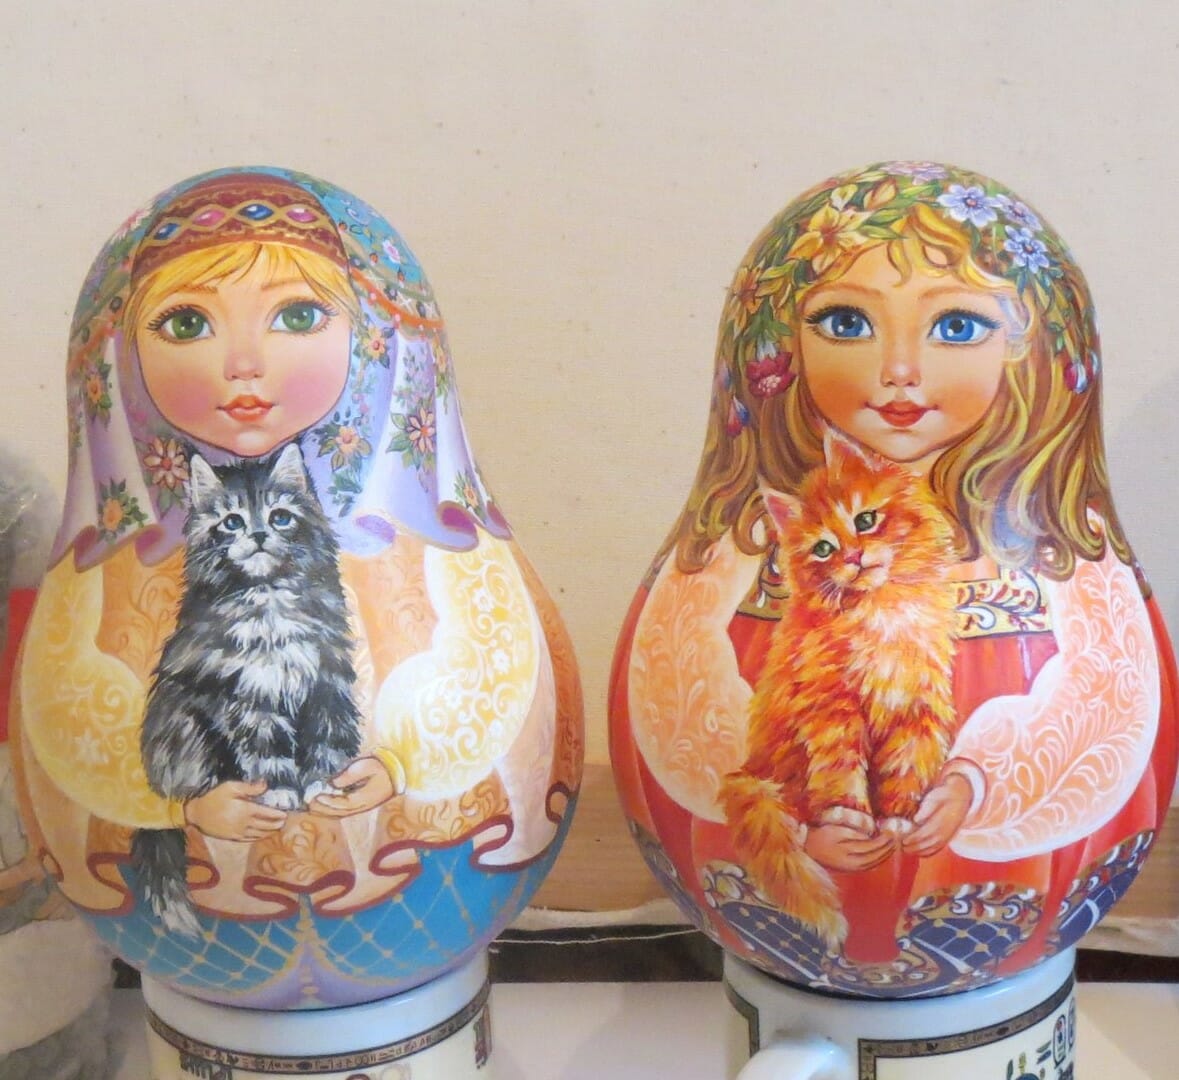 Roly Poly music wooden Russian wobble doll art painted